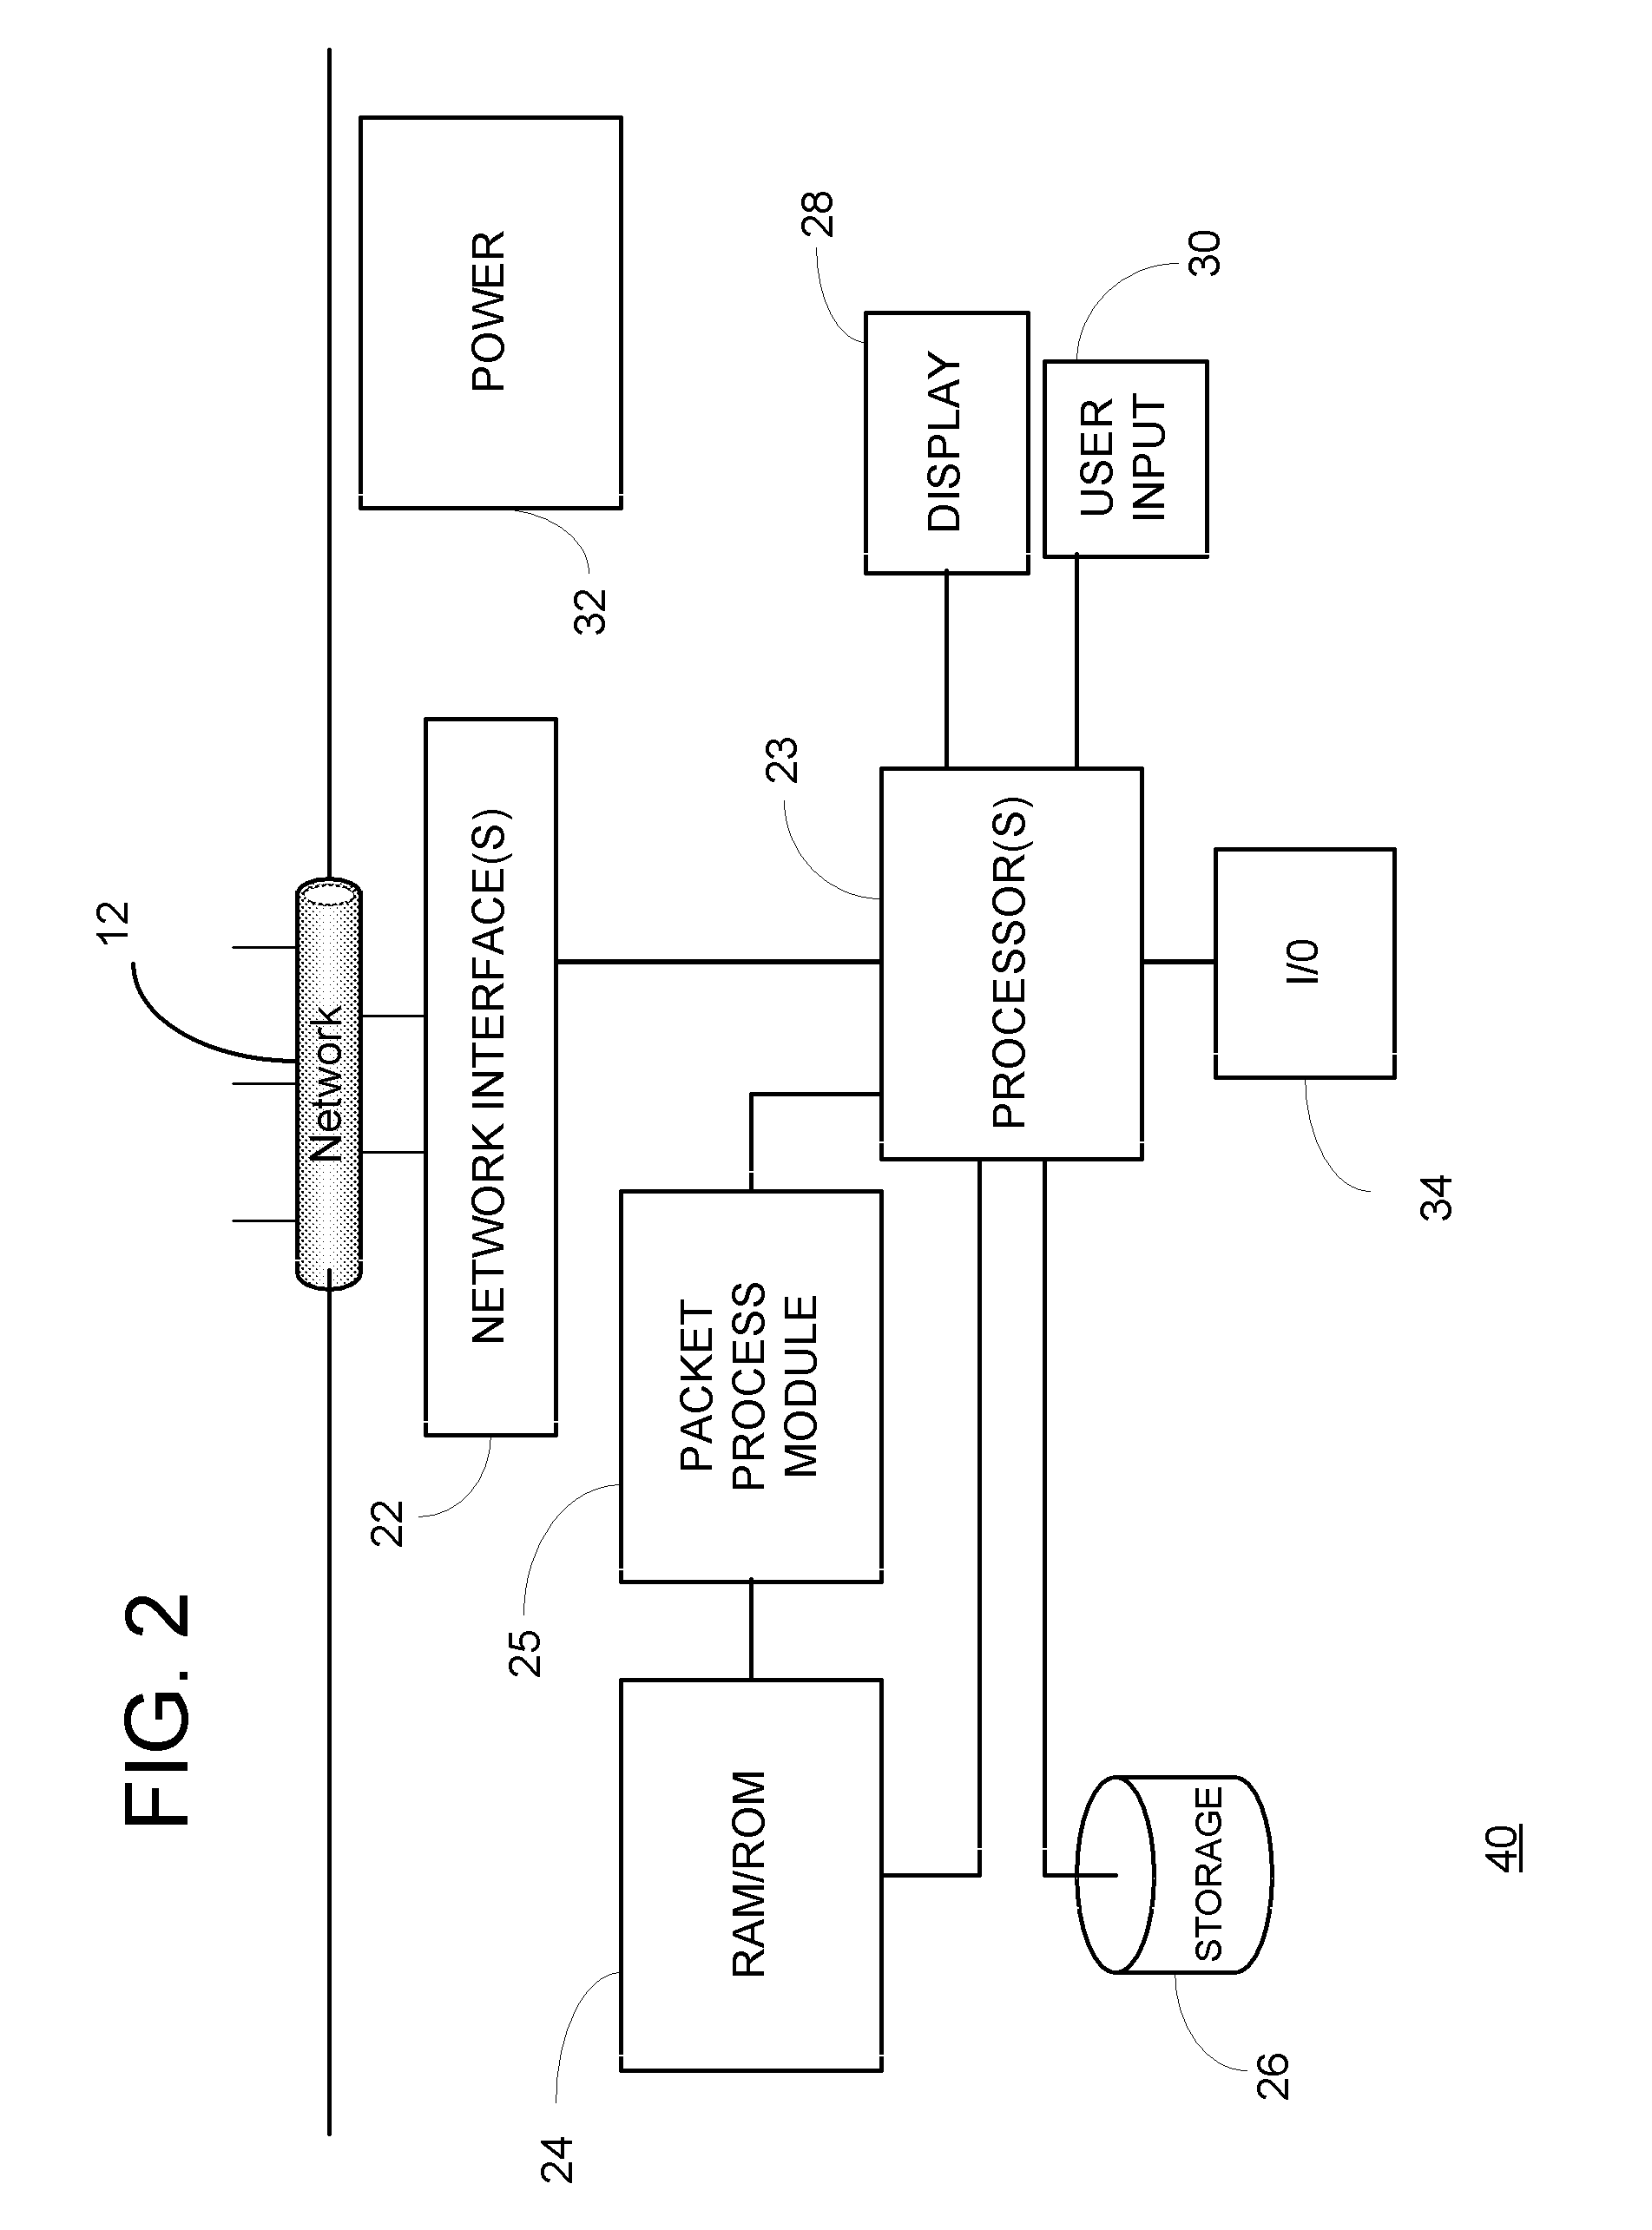 Method and apparatus of measuring and reporting data gap from within an analysis tool